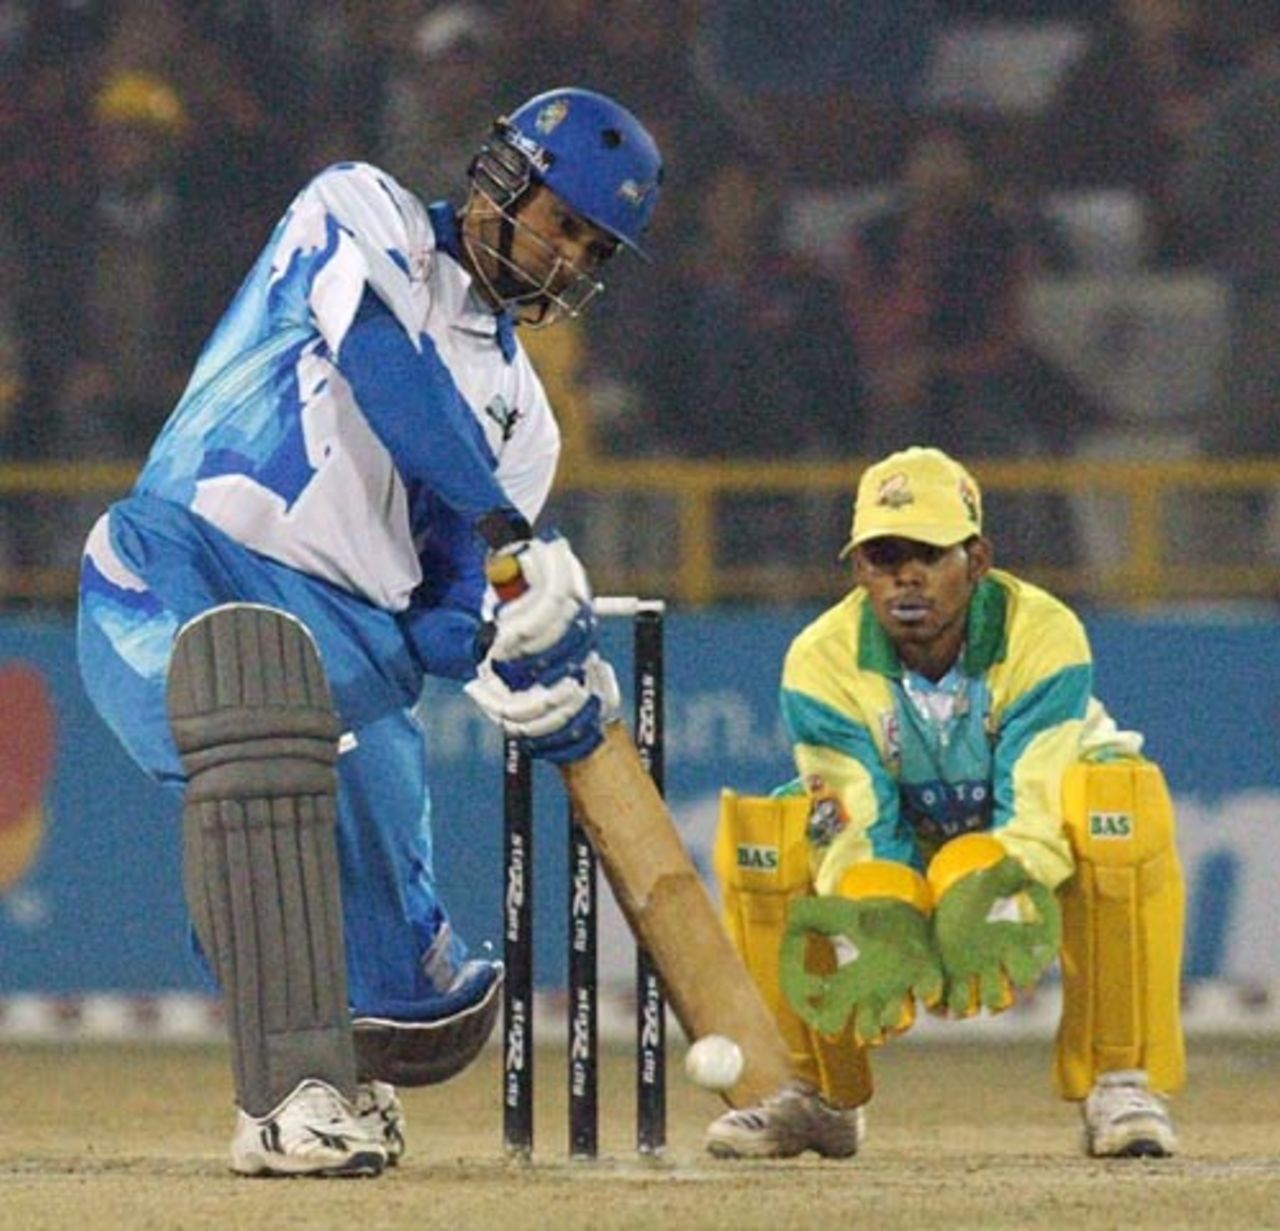 Abbas Ali is poised to wallop the ball, Chandigarh Lions v Delhi Jets, 2nd semi-final, Indian Cricket League, Panchkula, December 15, 2007